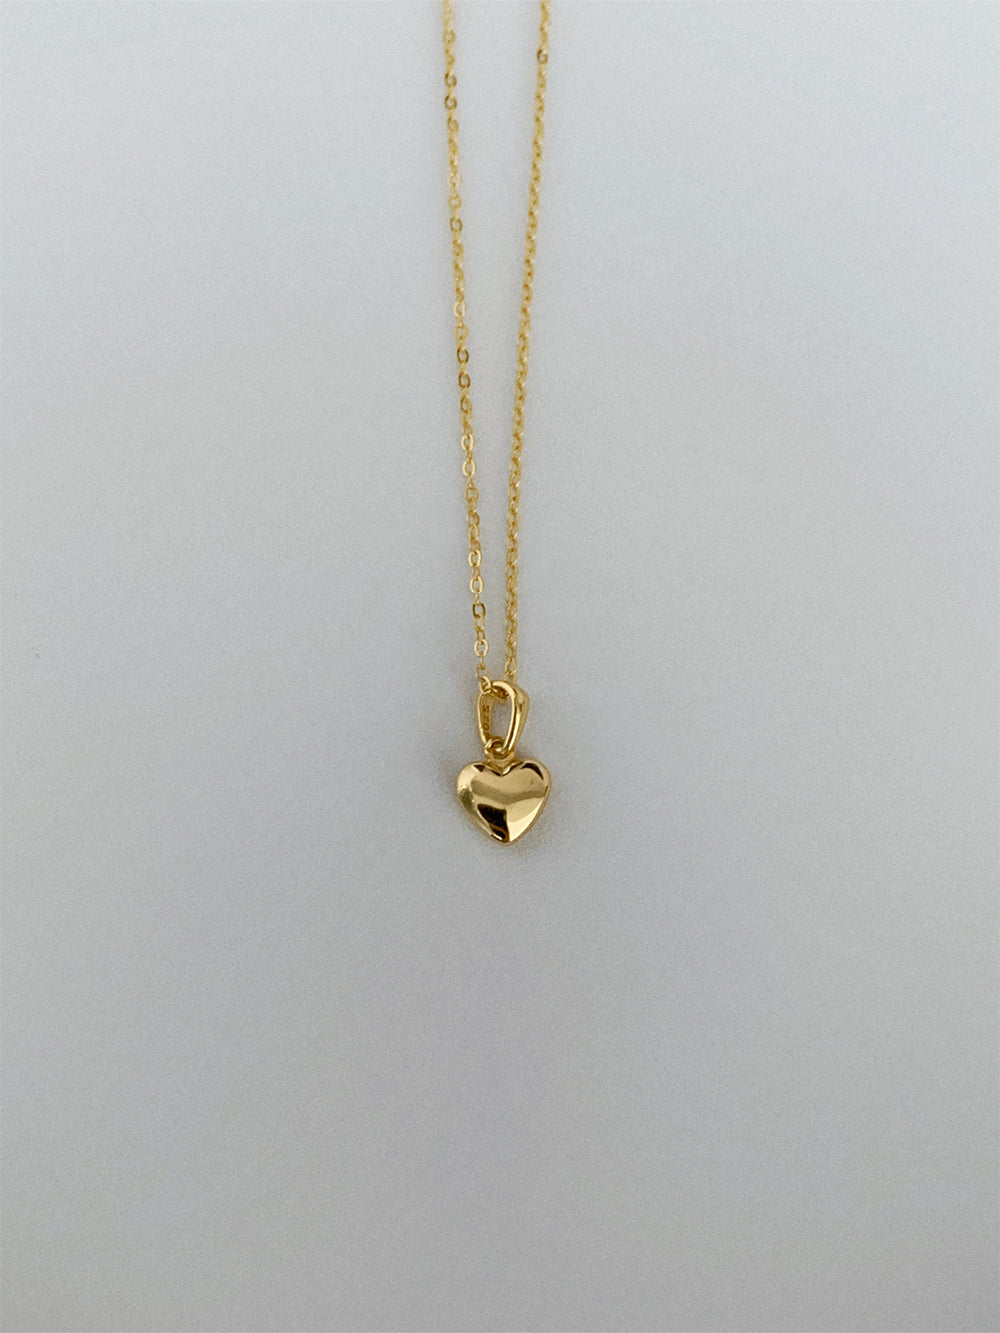 Signature Gold Puffed Heart Pendant Necklace in 14k Gold - Macy's